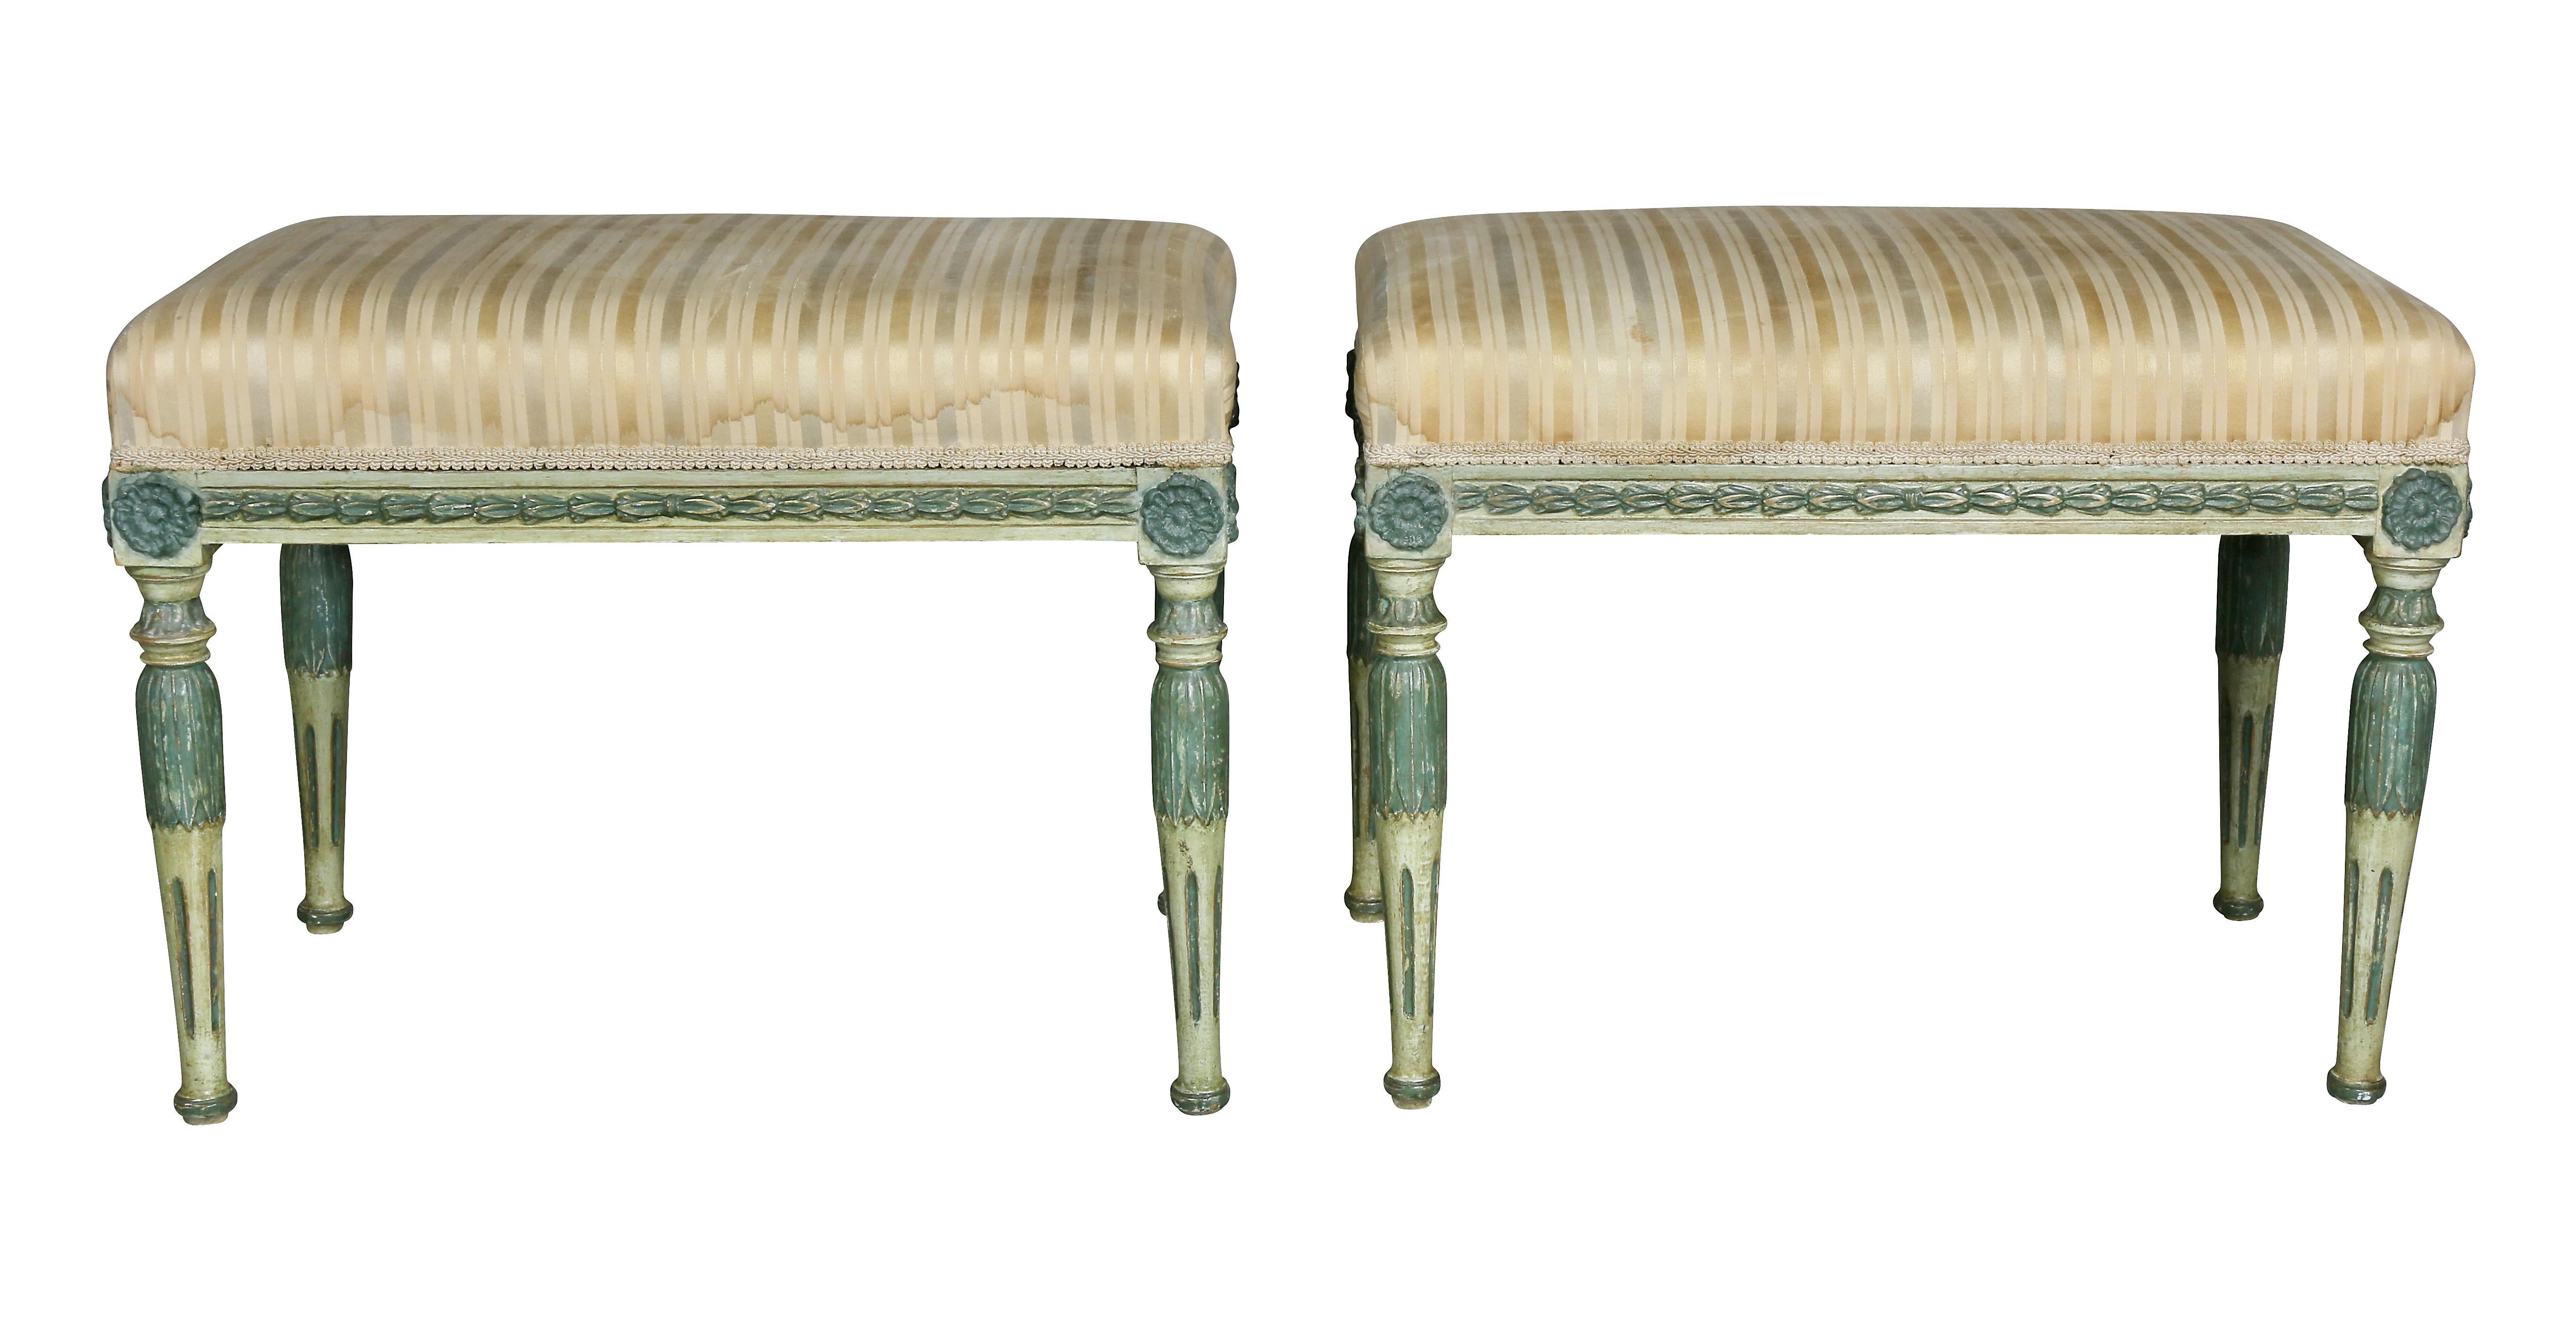 Neoclassical Pair of Swedish Neoclassic Painted Benches